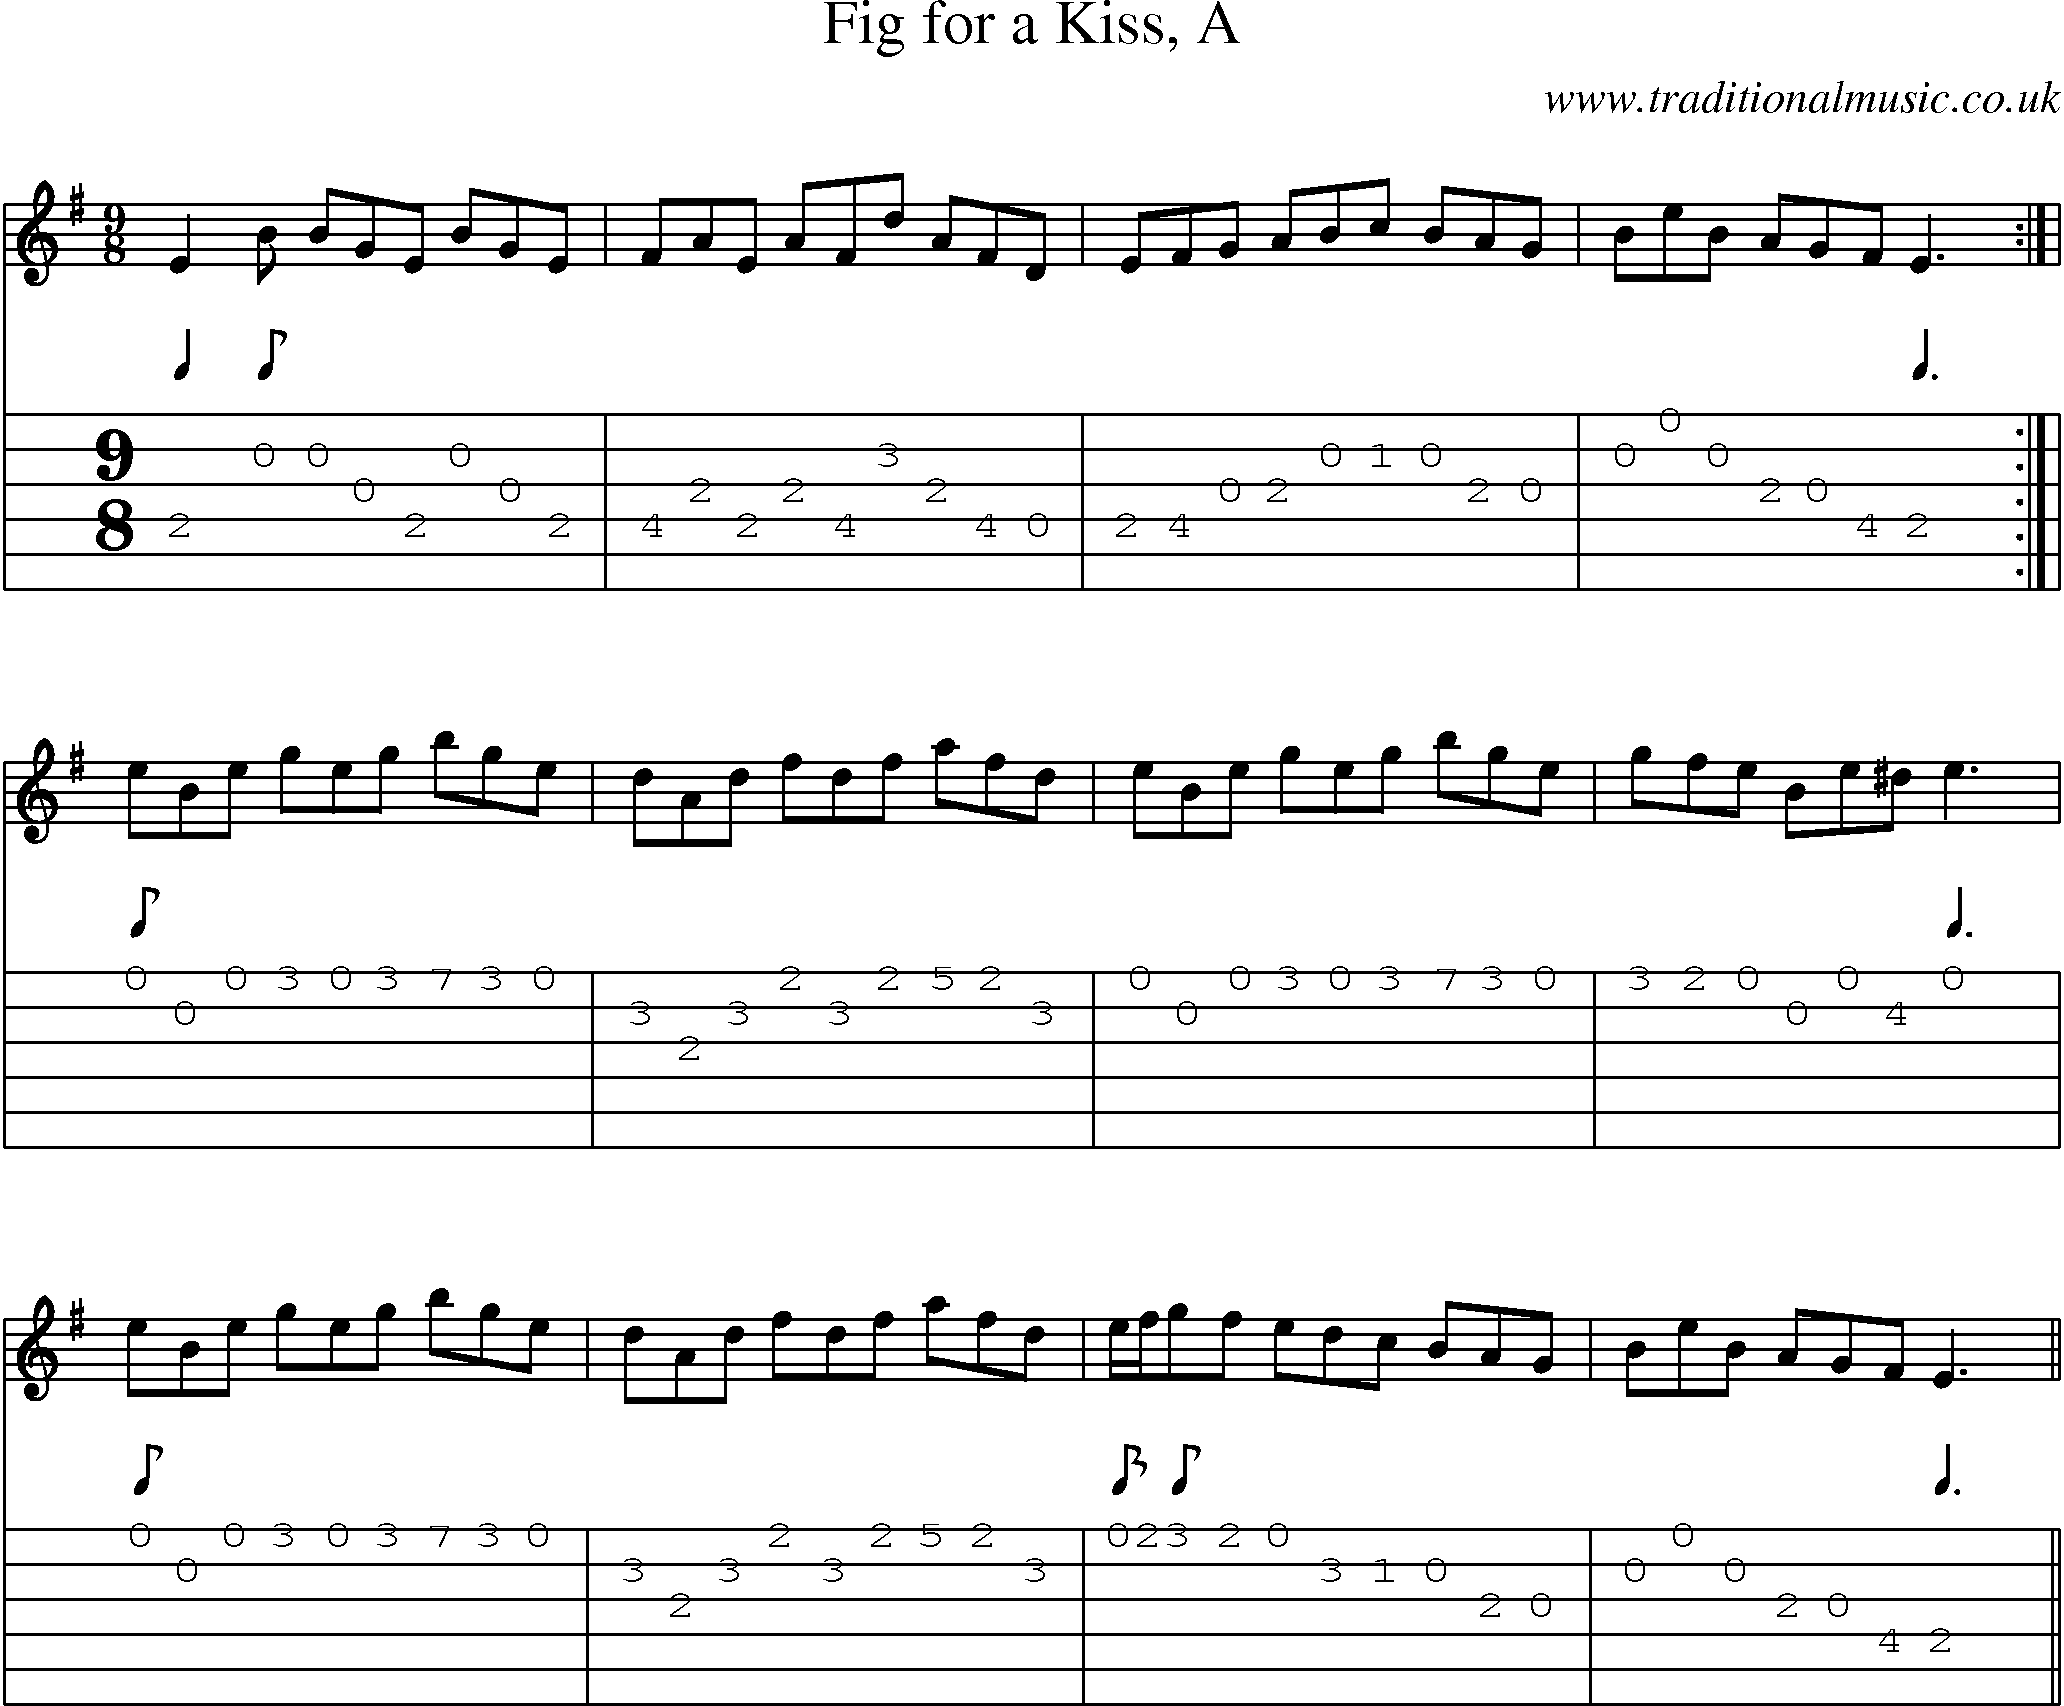 Music Score and Guitar Tabs for Fig For A Kiss A